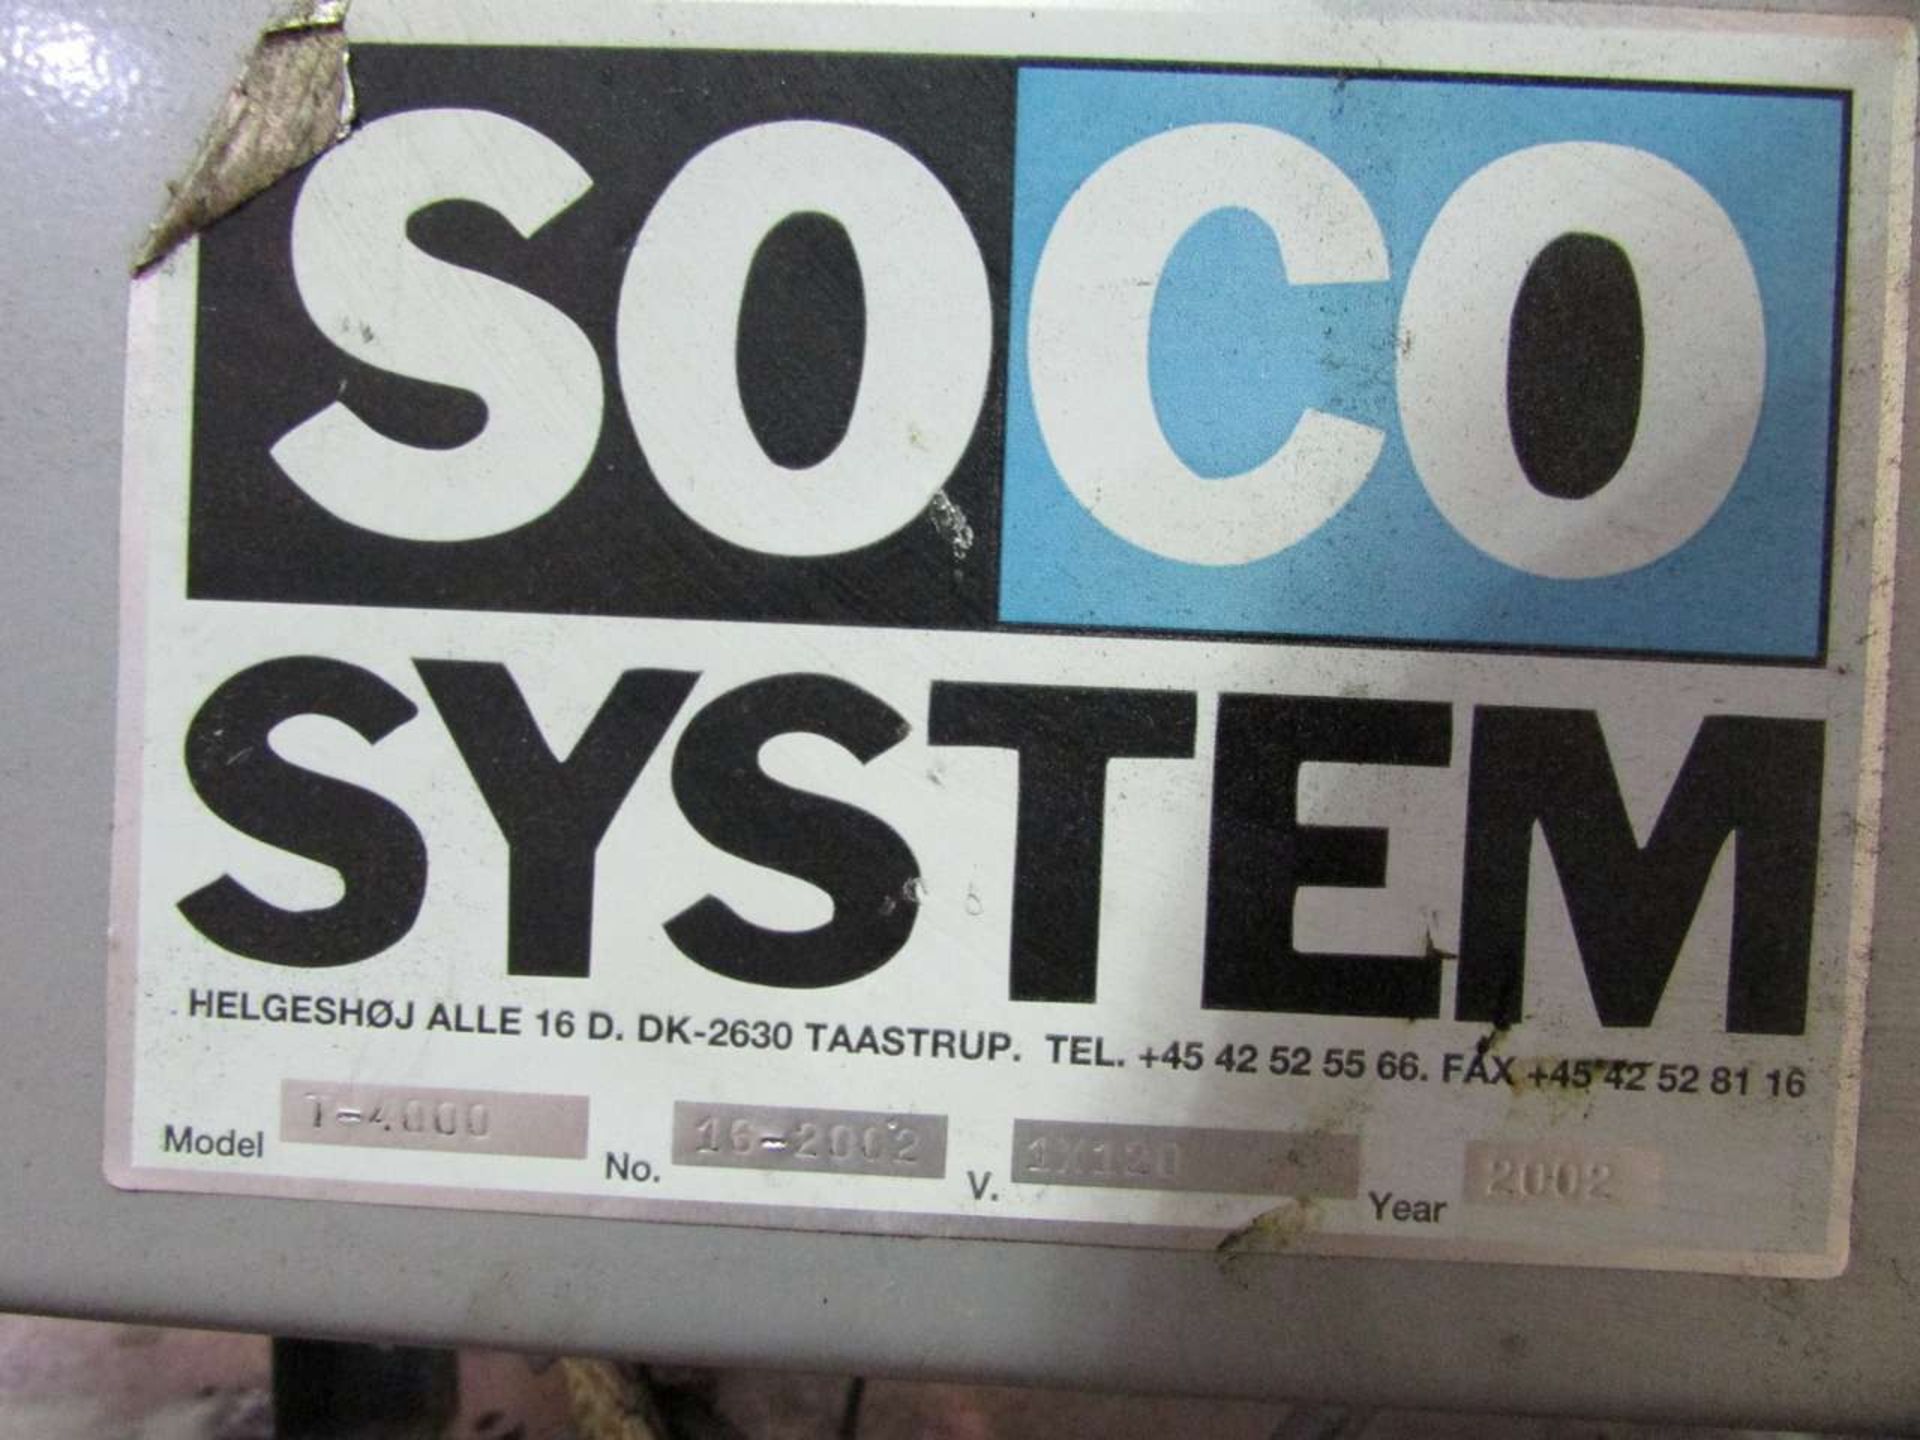 2002 Soco System T-4000 Automatic Carton Sealing Machine - Image 8 of 8